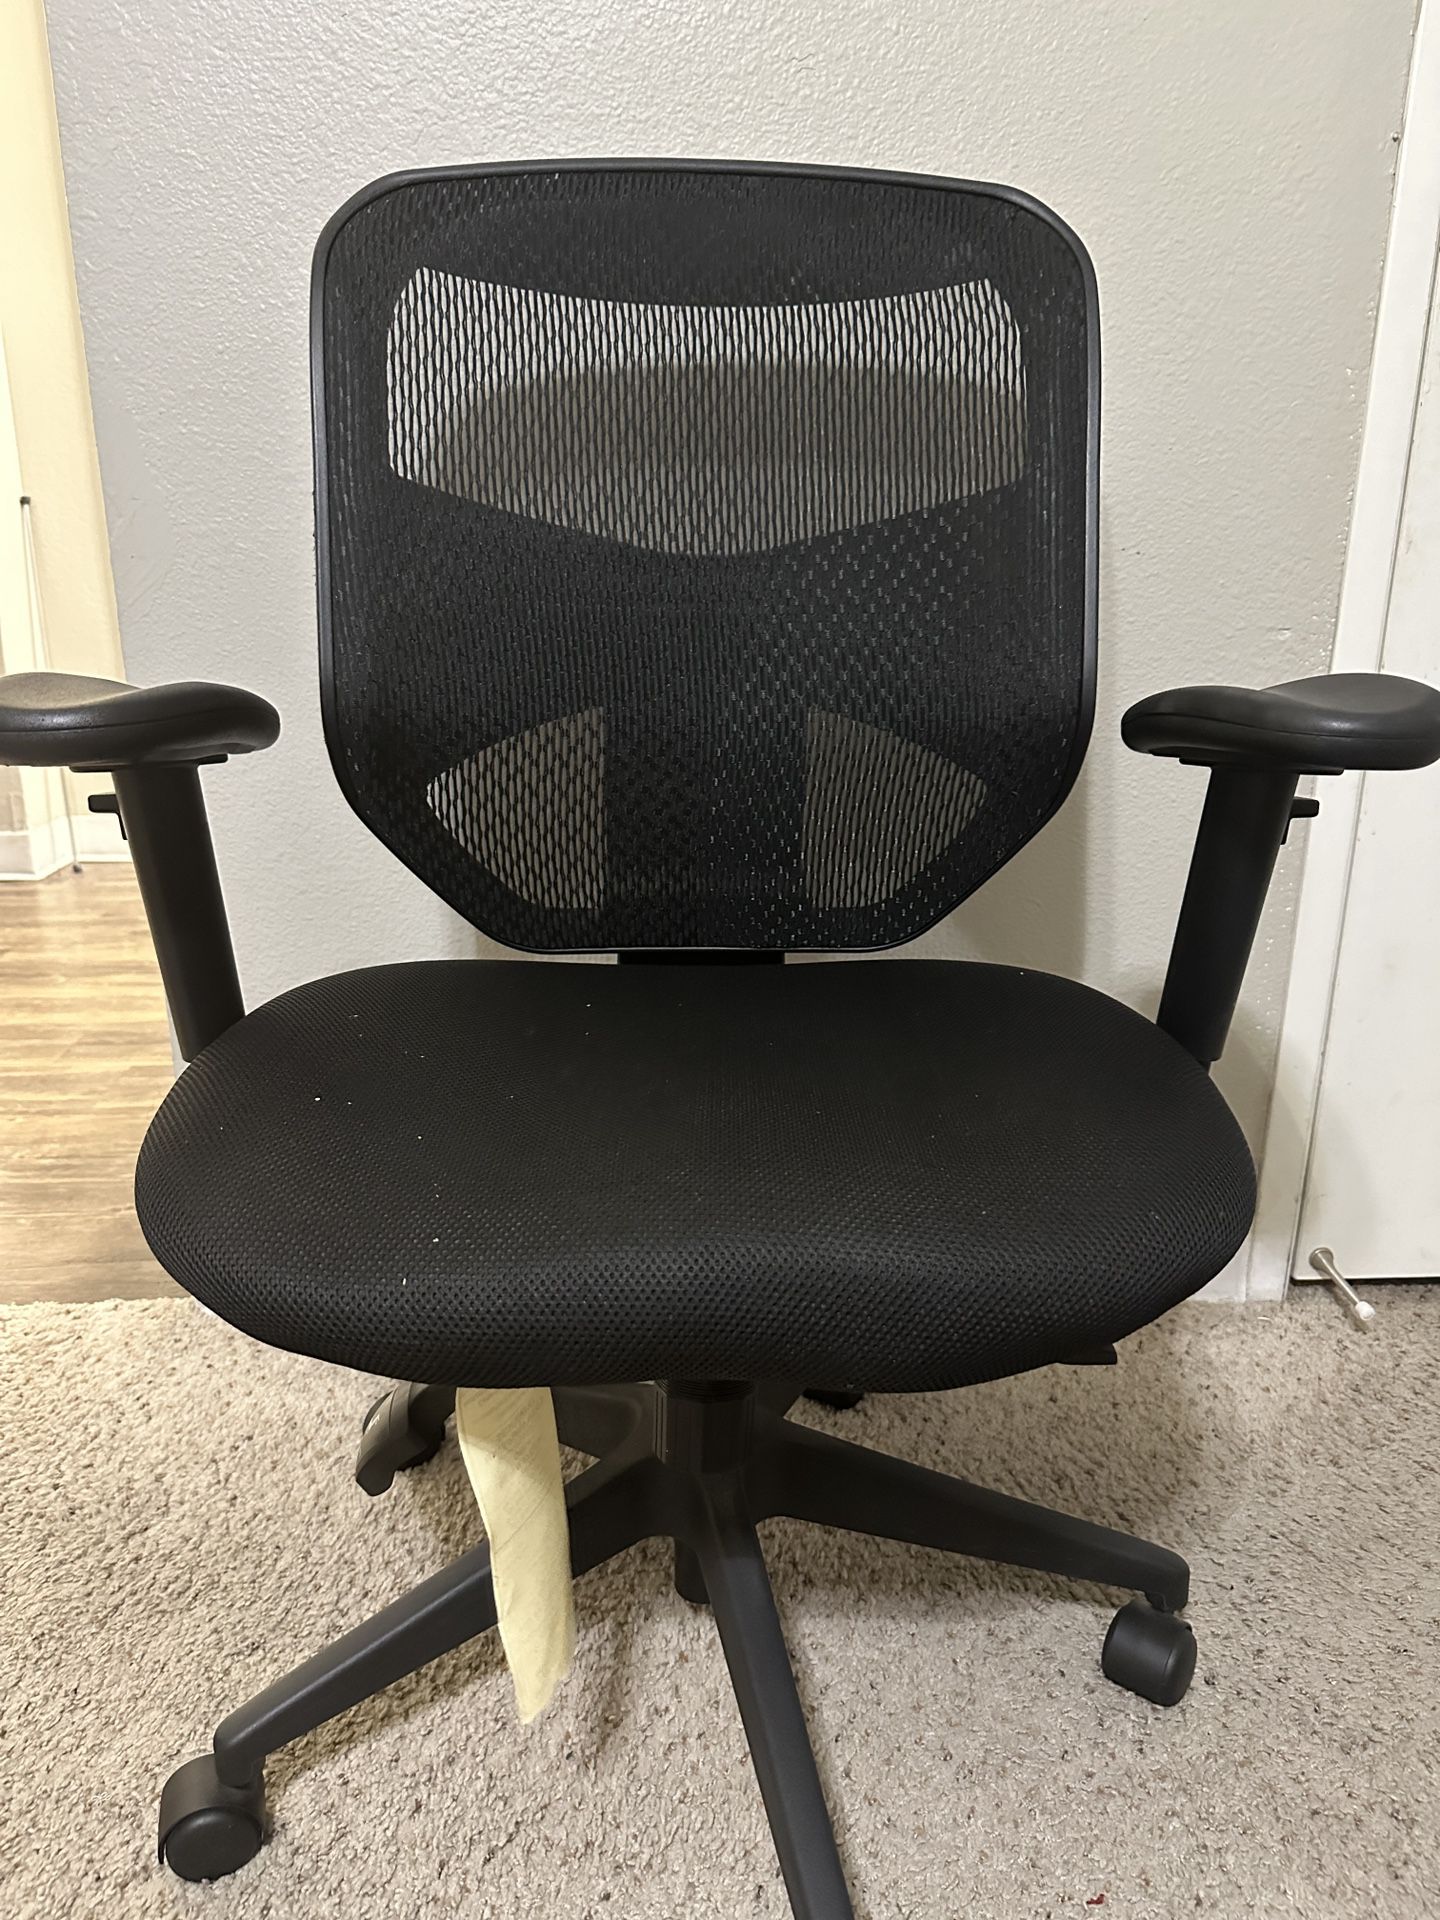 3 way Adjustable Office Chair 